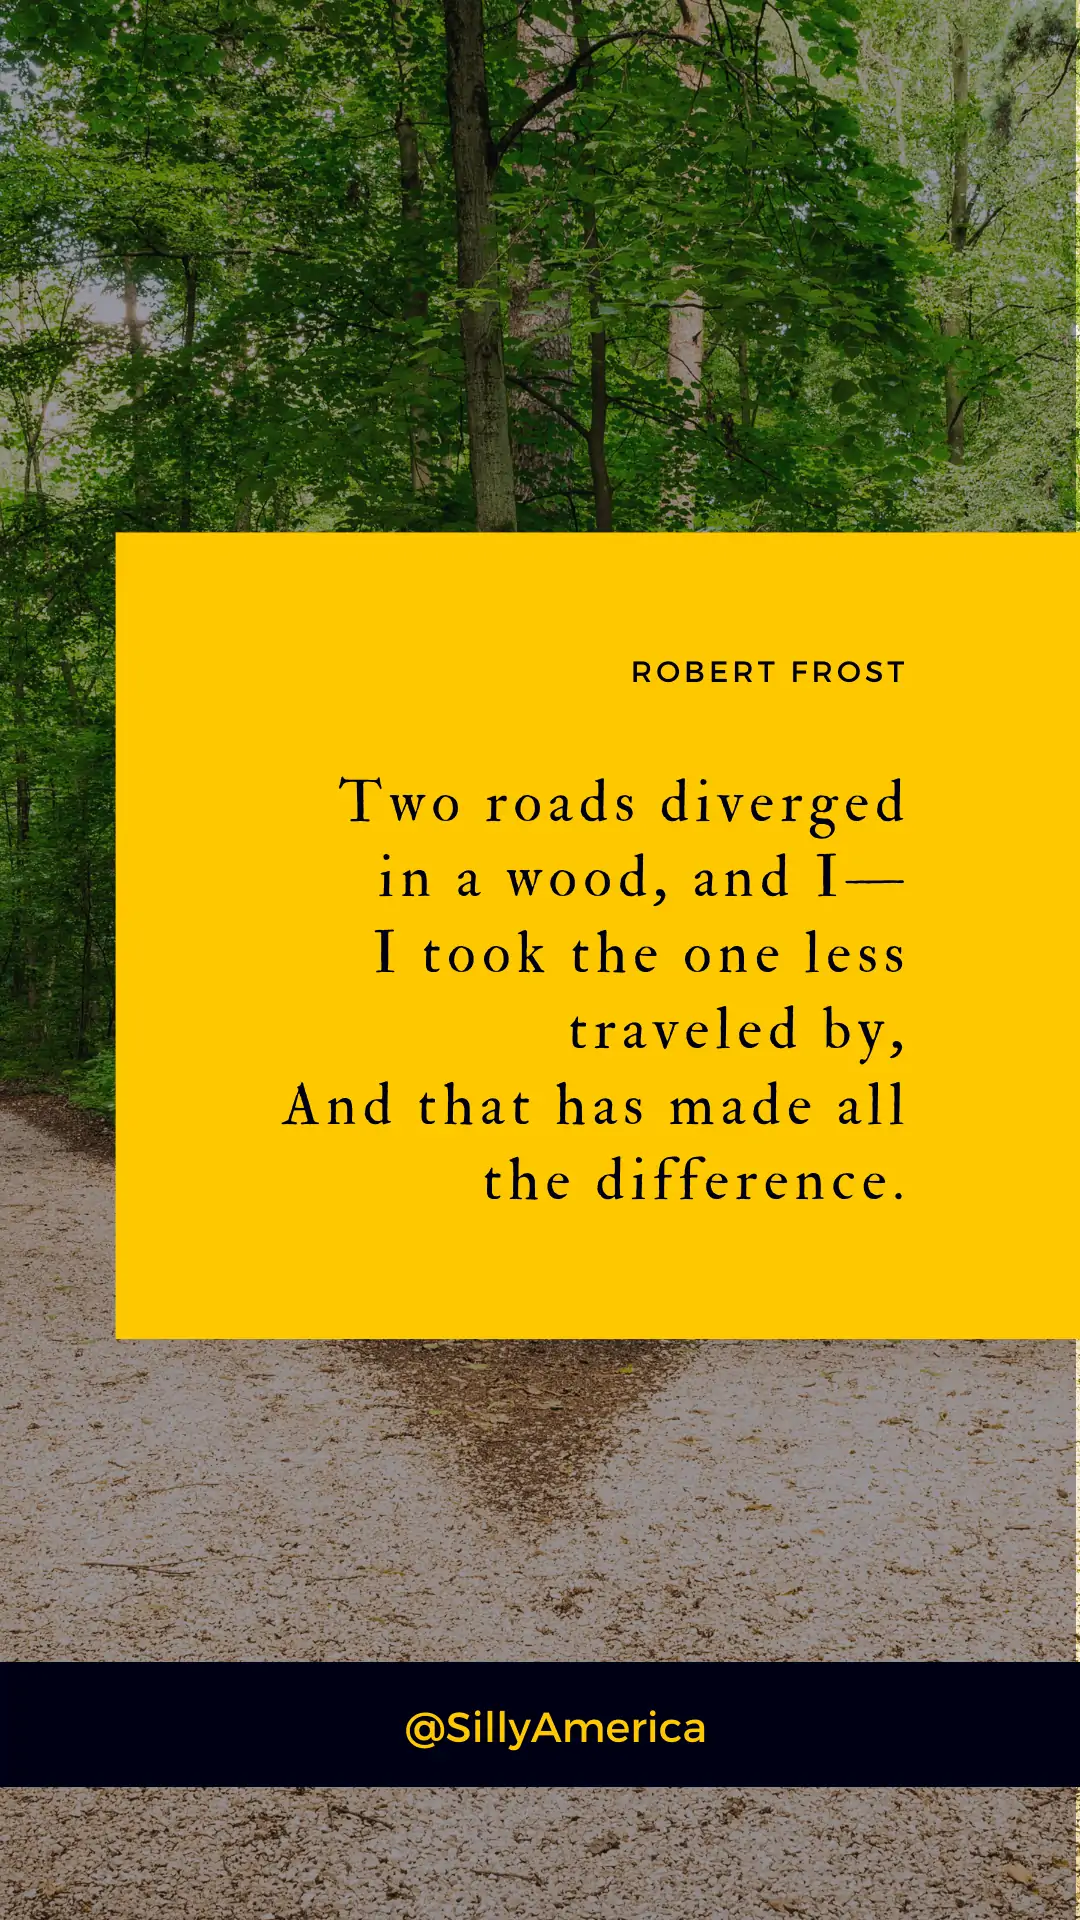 “Two roads diverged in a wood, and I—I took the one less traveled by, And that has made all the difference.” Robert Frost, The Road Not Taken